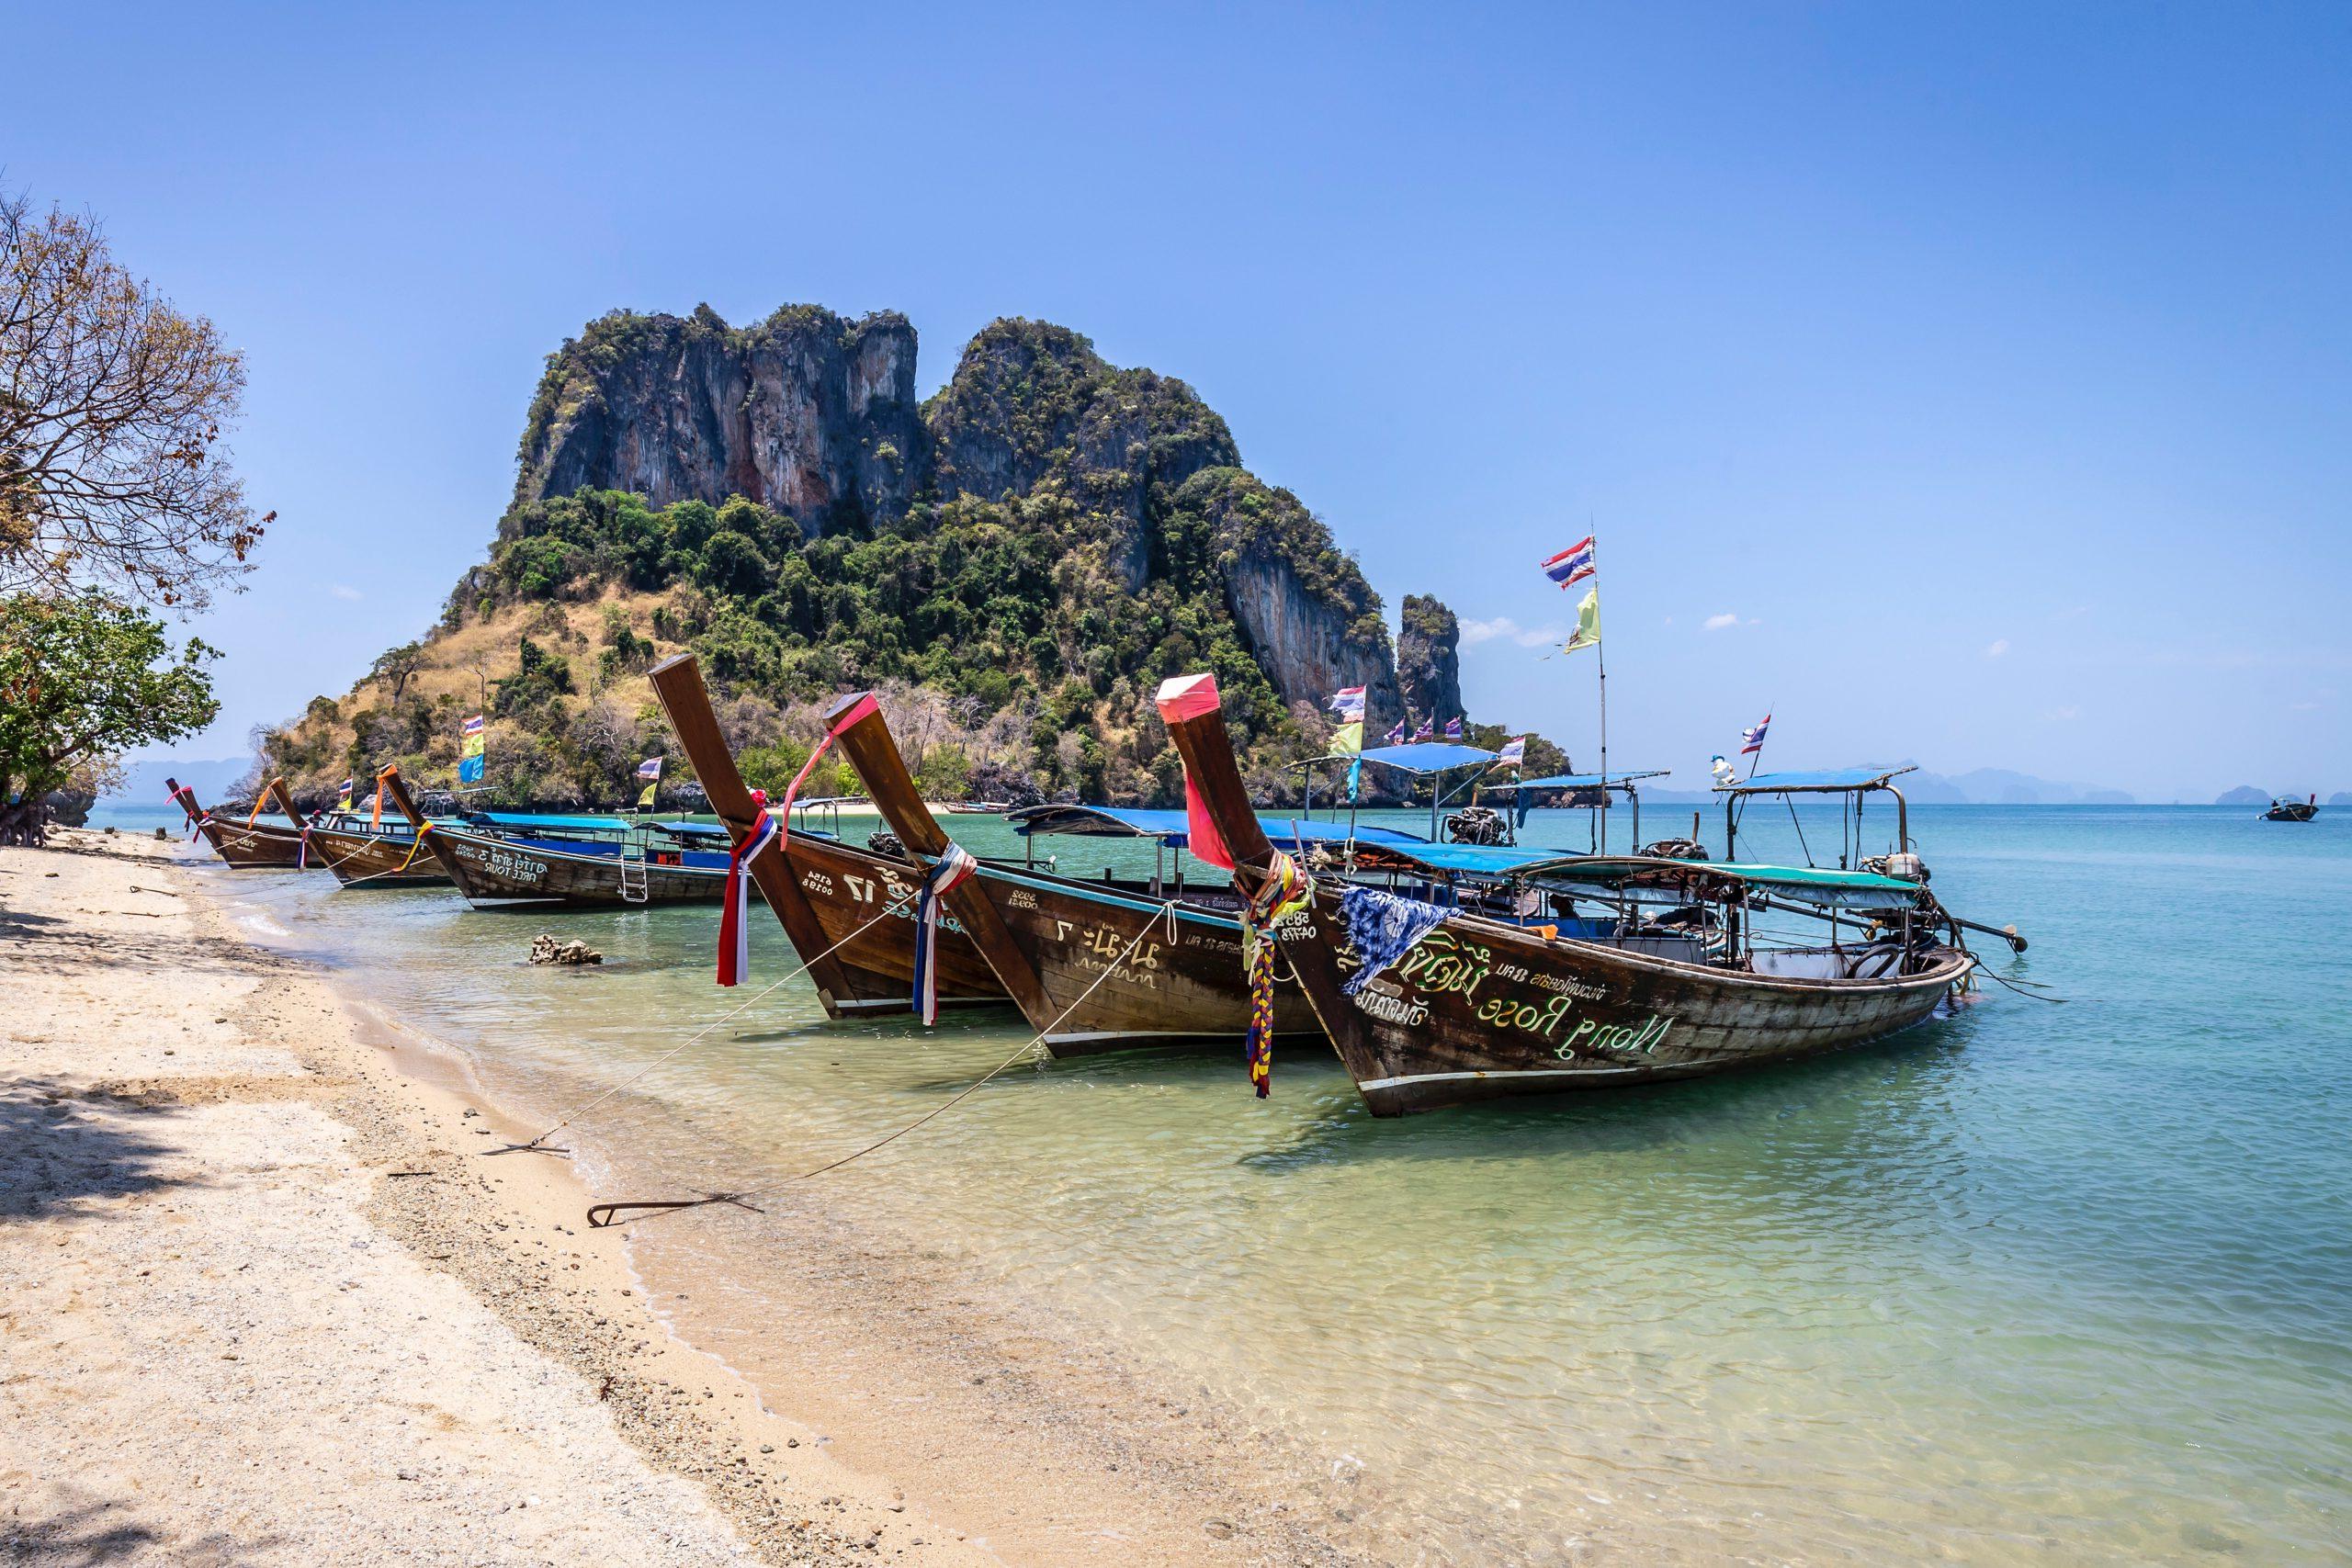 Photo of boats docked at an island